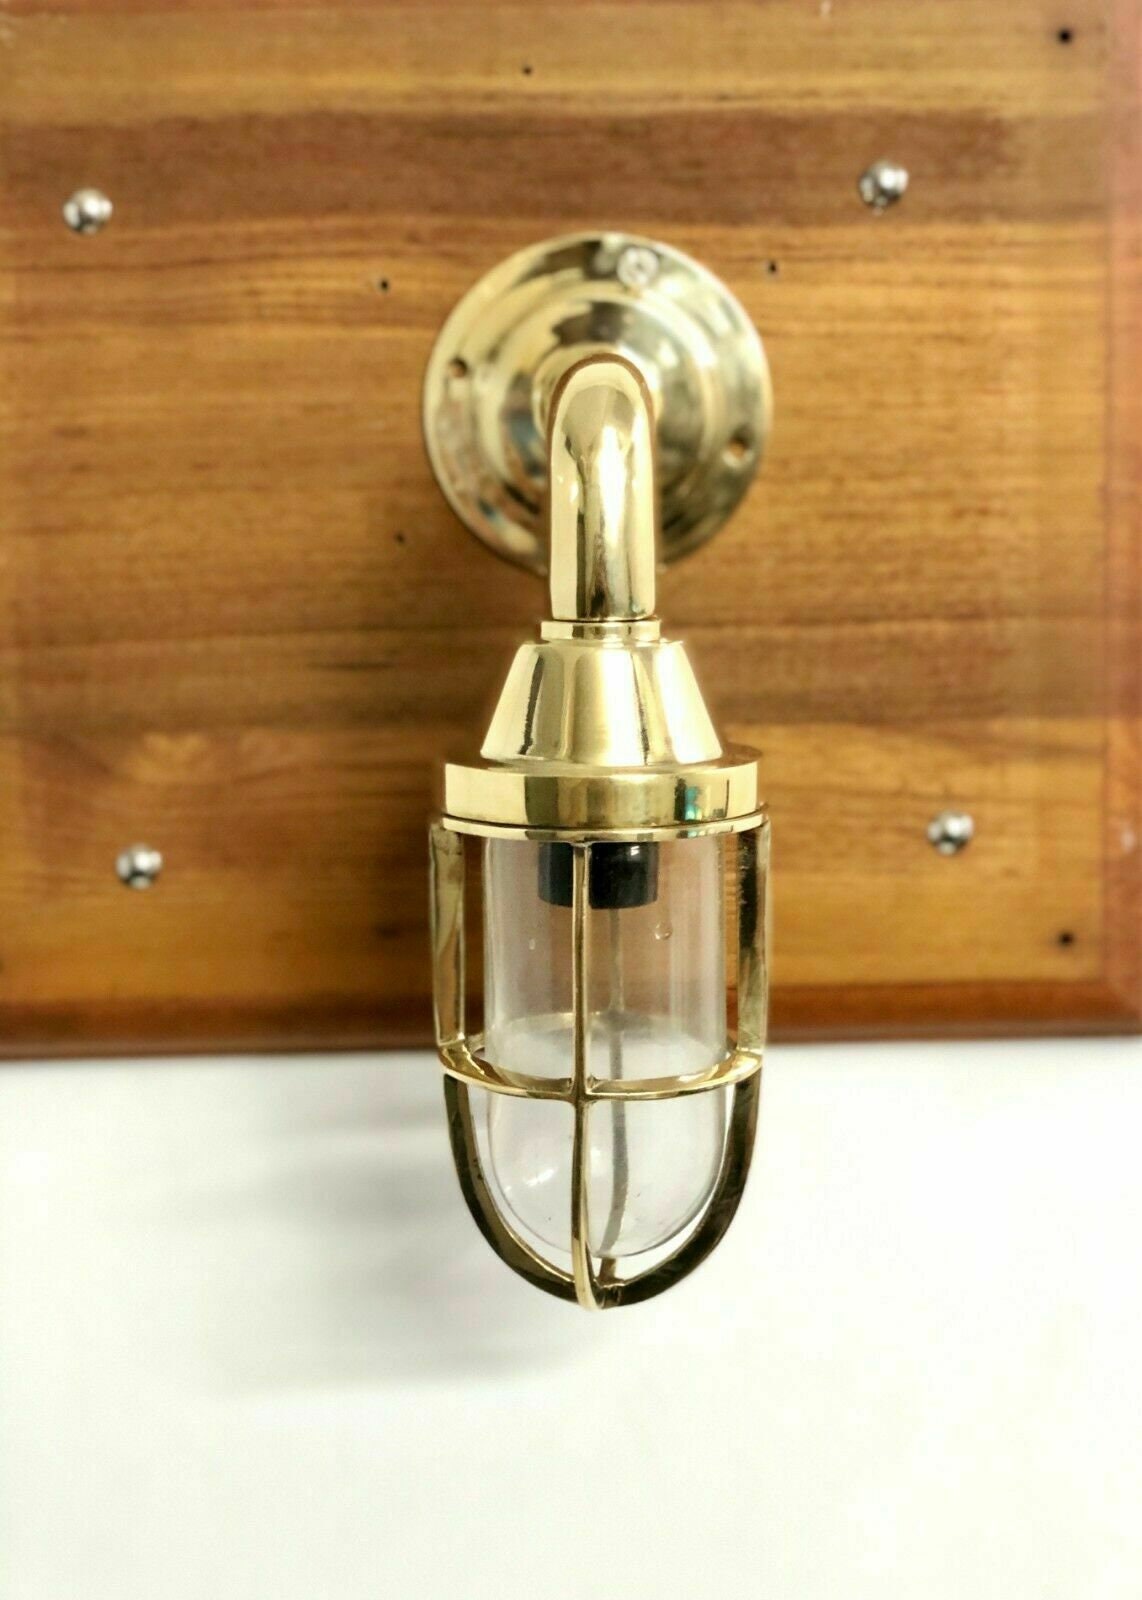 NAUTICAL VINTAGE STYLE ALLEYWAY BULKHEAD WALL BRASS SMALL NEW LIGHT 1 Piece 